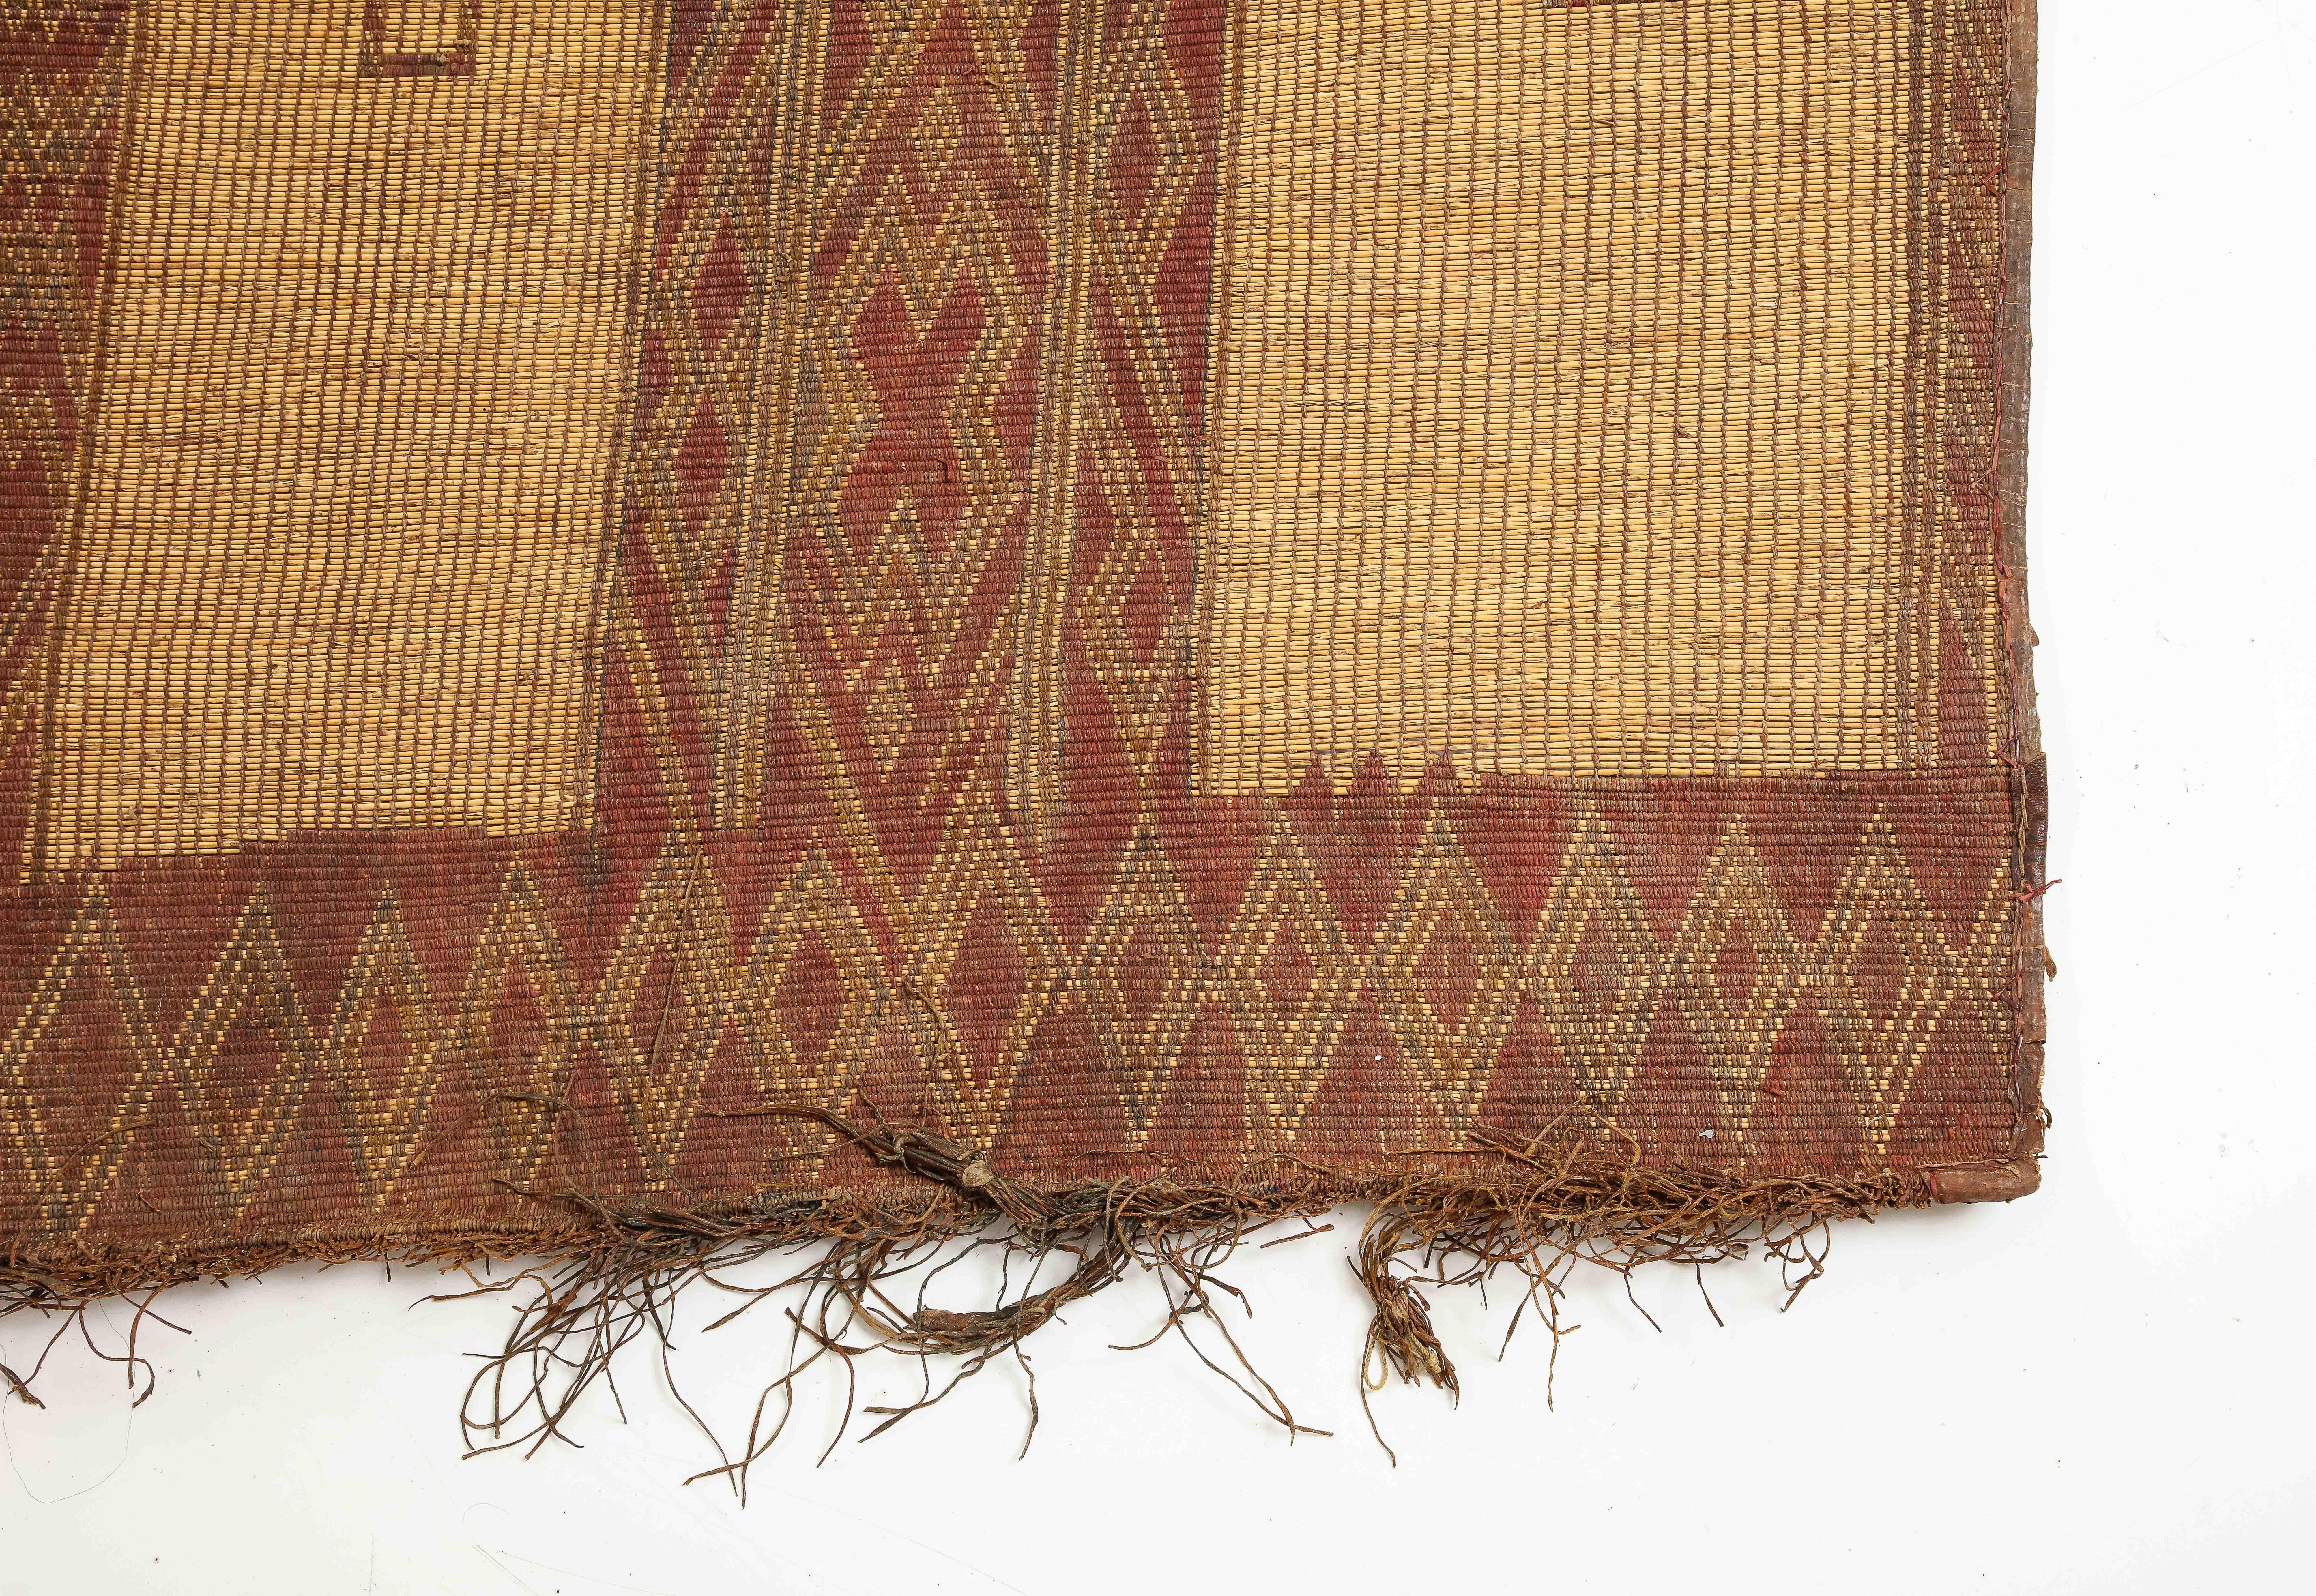 Early 20th Century 19th /early 20th C. Tuareg Leather & Reed Hand-Woven Carpet, Sahara Desert For Sale